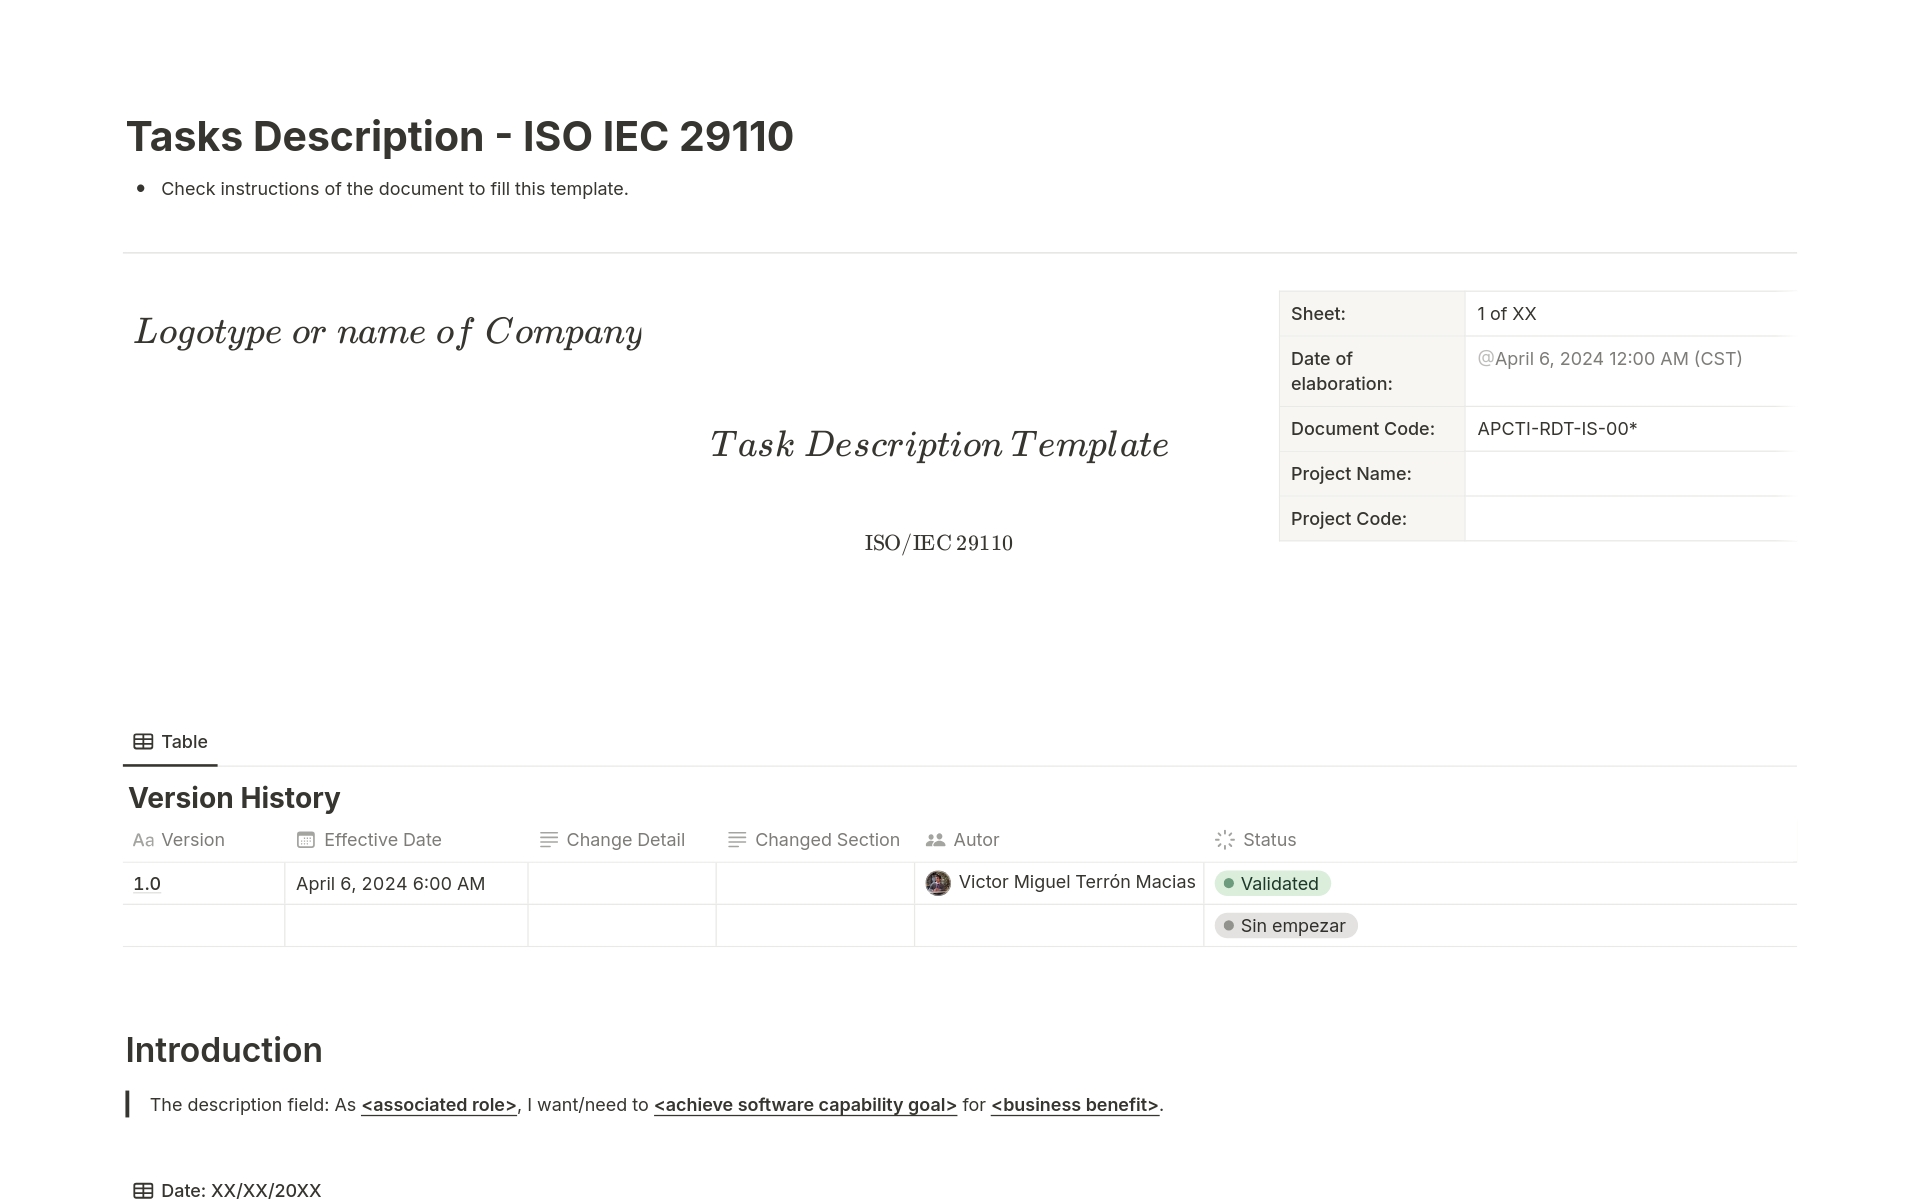 This template helps the software development process, specifically by streamlining it, improving communication, and ensuring that tasks are completed efficiently and effectively.
This template contains all the indicated elements in the implementation guide of ISO IEC standards.